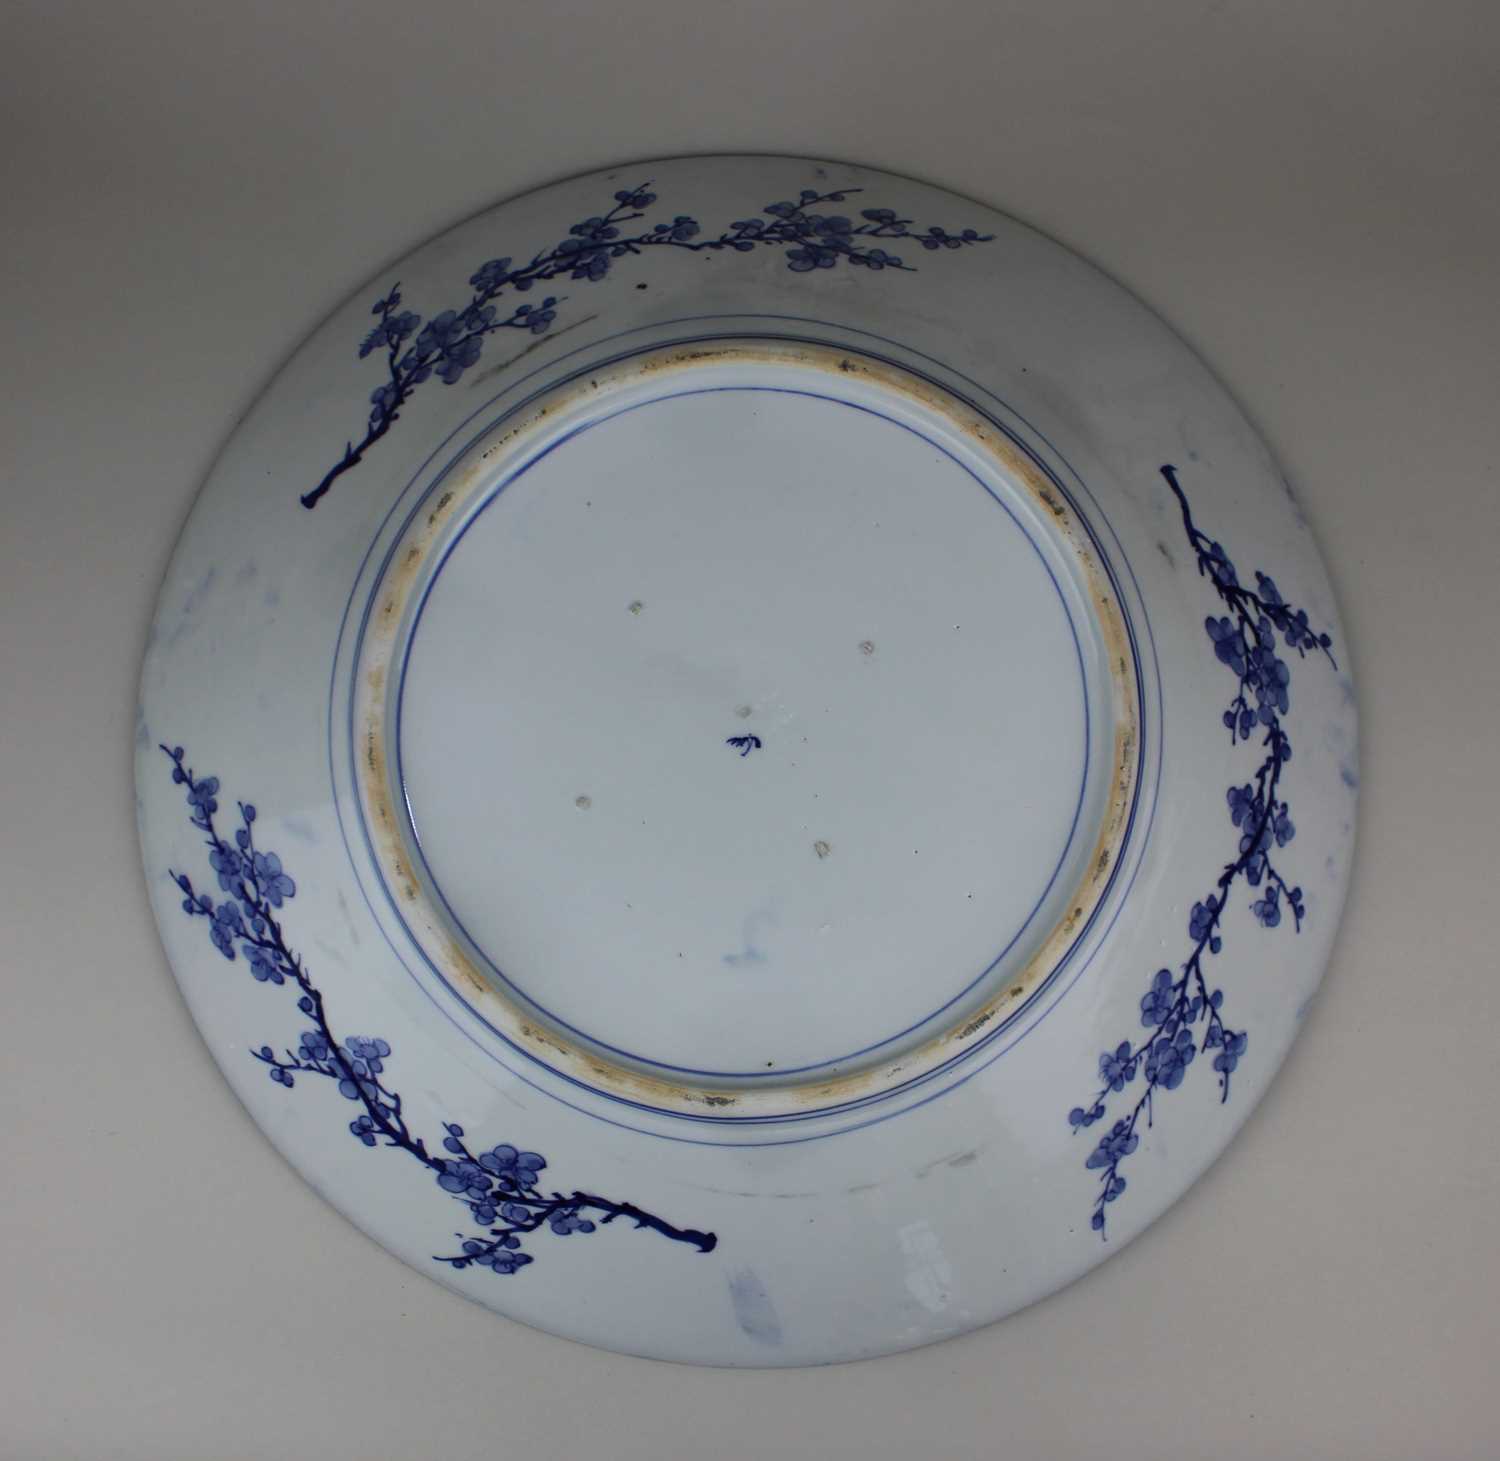 A Japanese blue and white porcelain charger decorated with a bird of prey amongst flowers and - Image 2 of 2